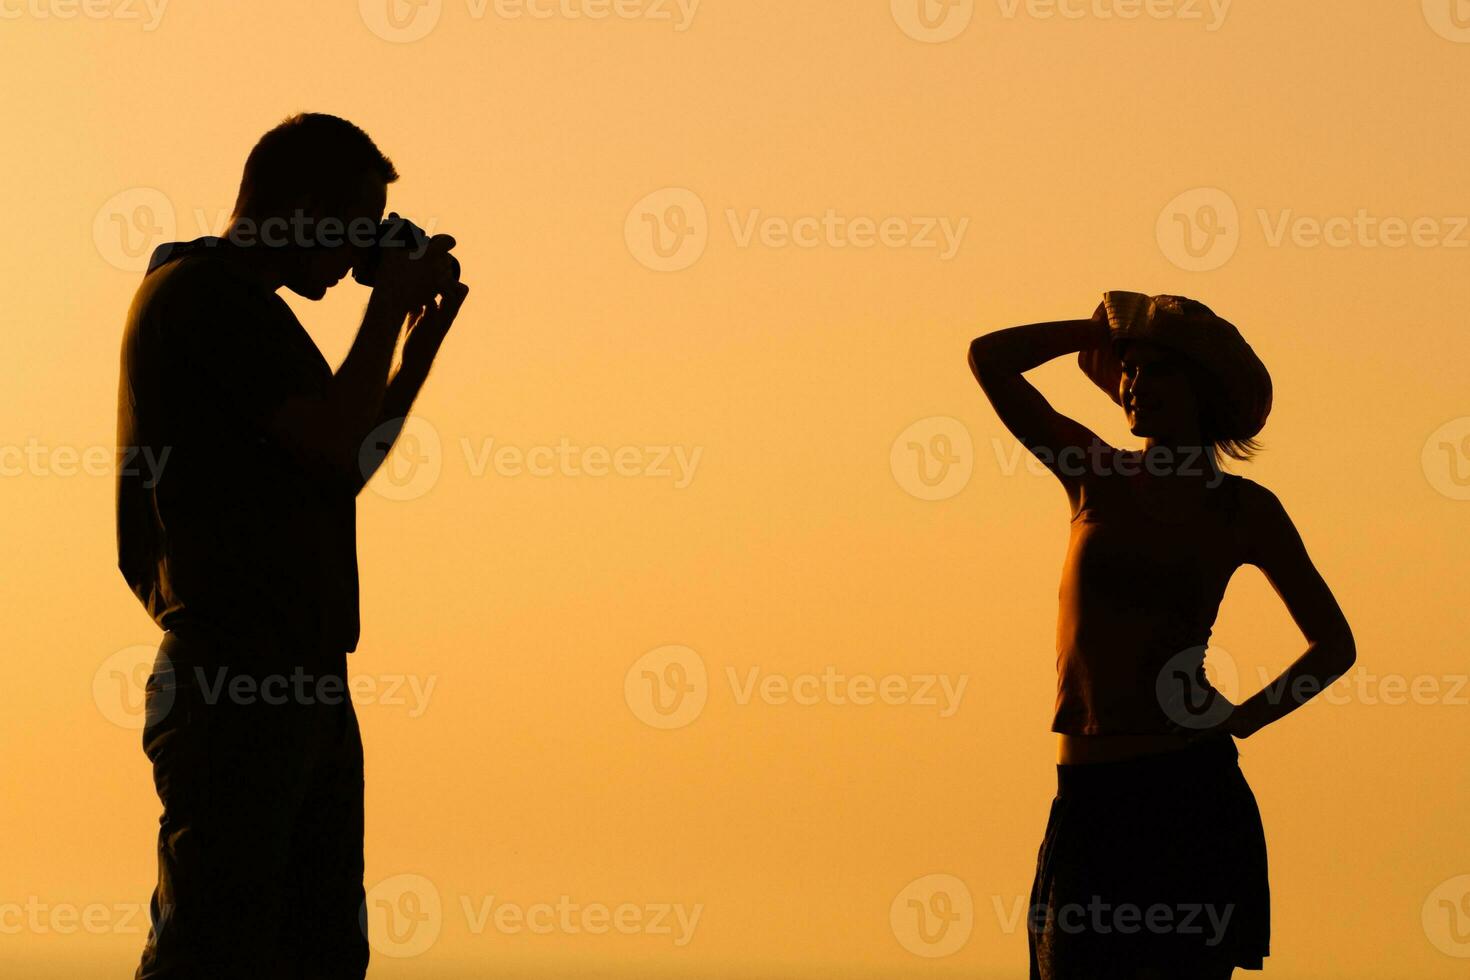 Silhouette of a man photographing woman photo